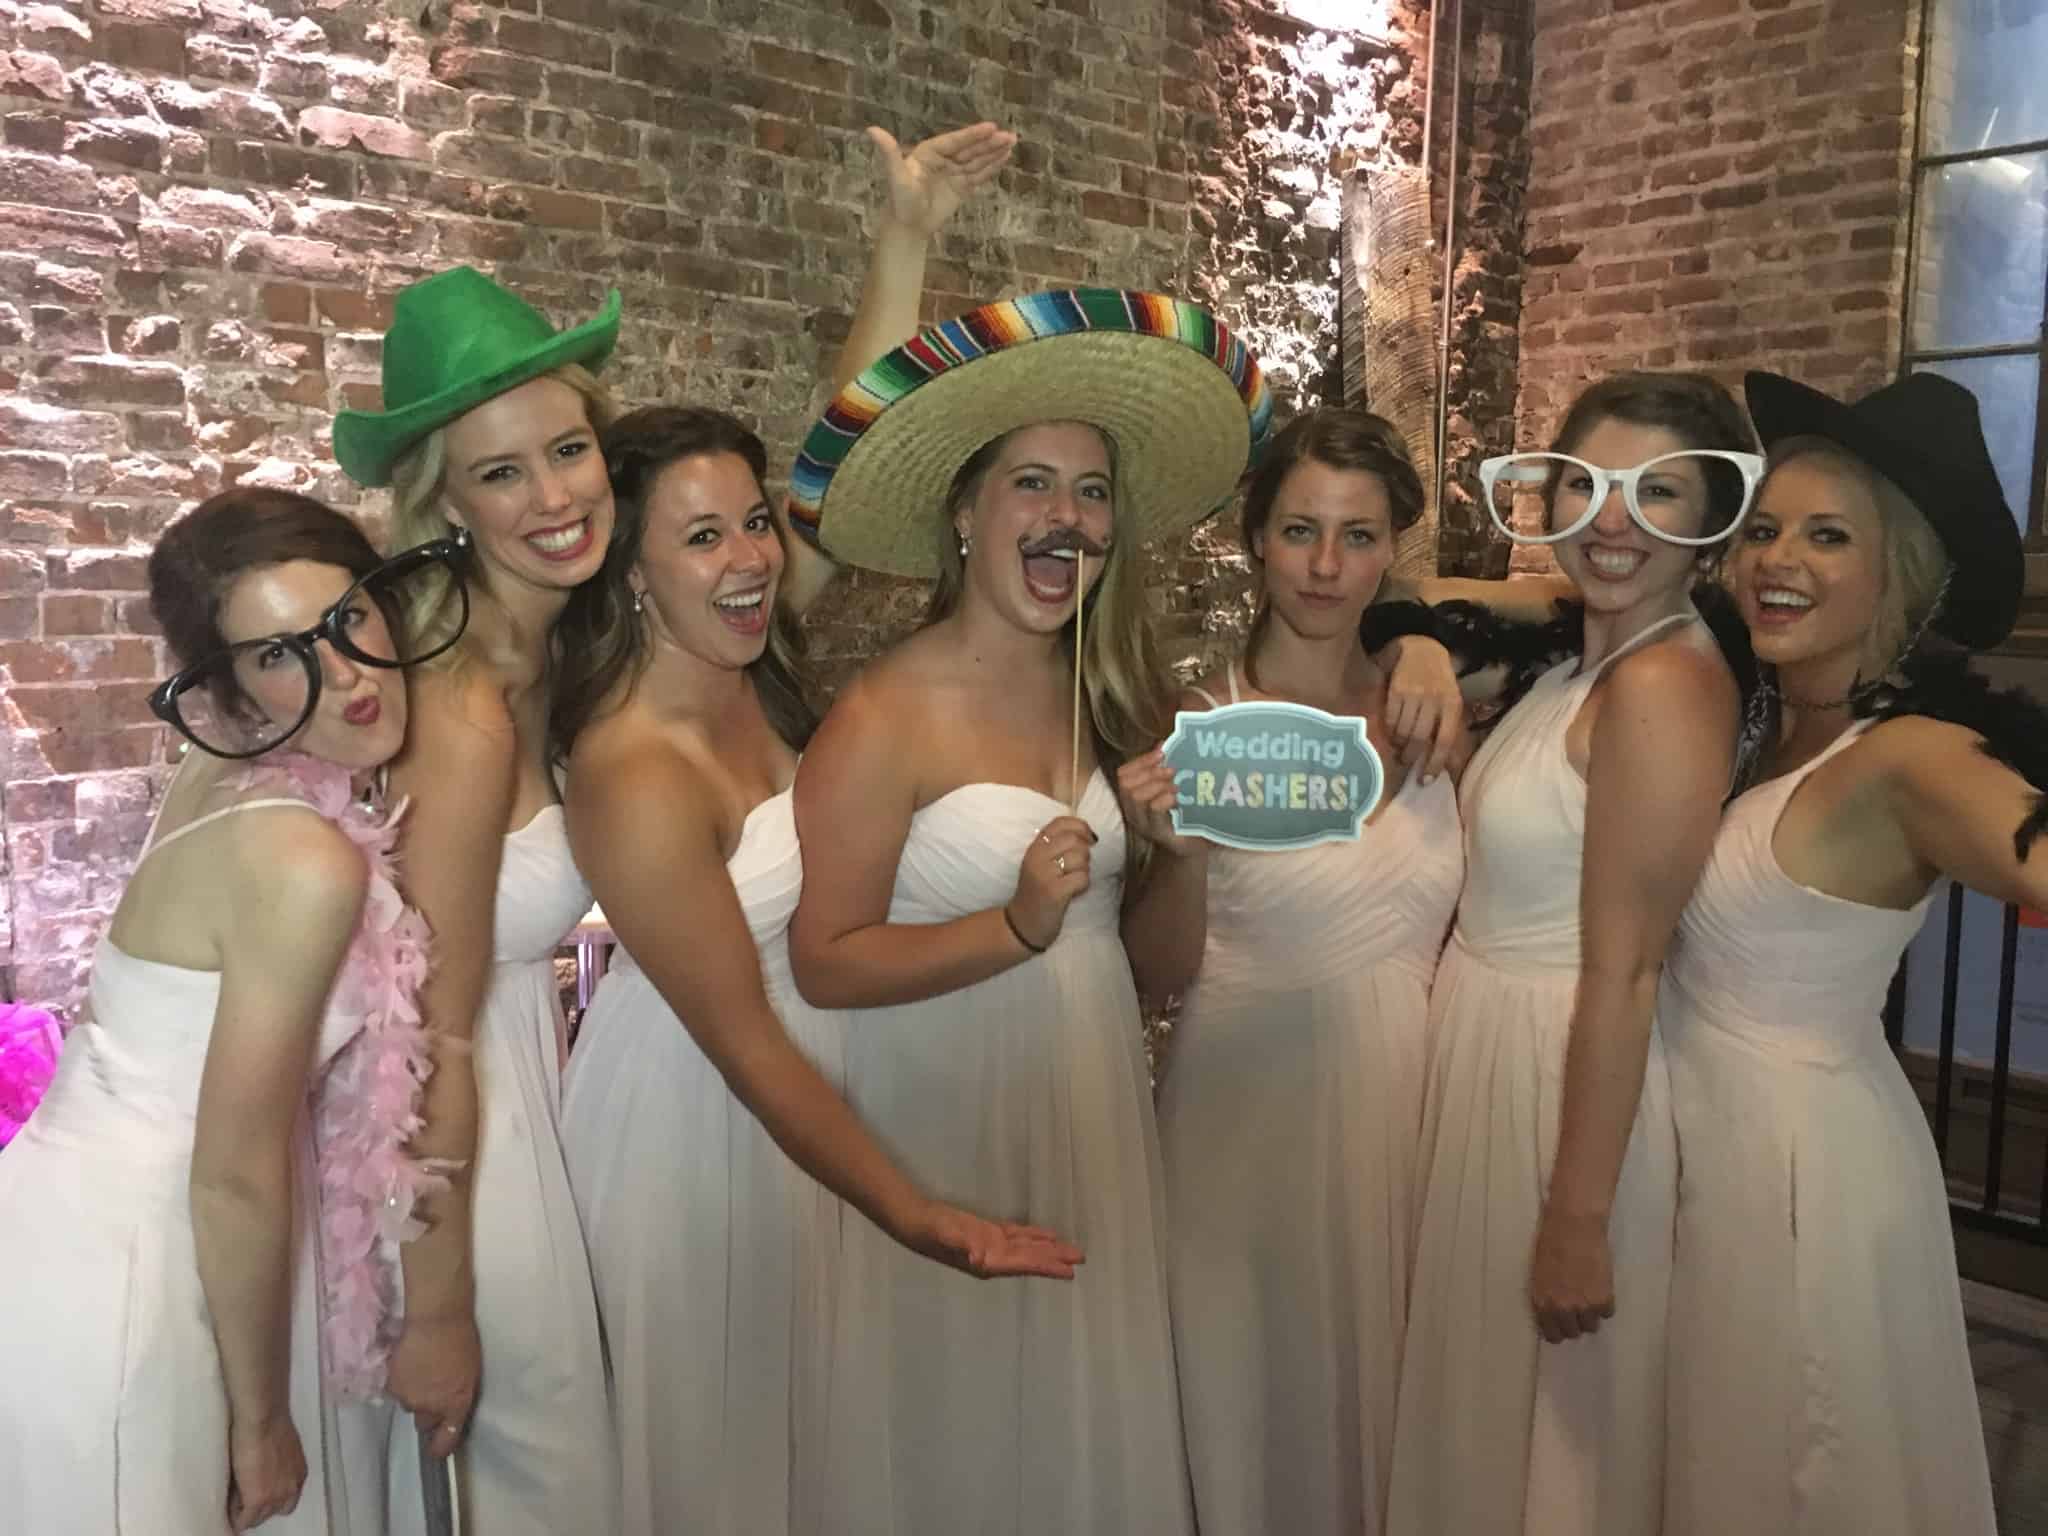 Bridal party with photo booth props